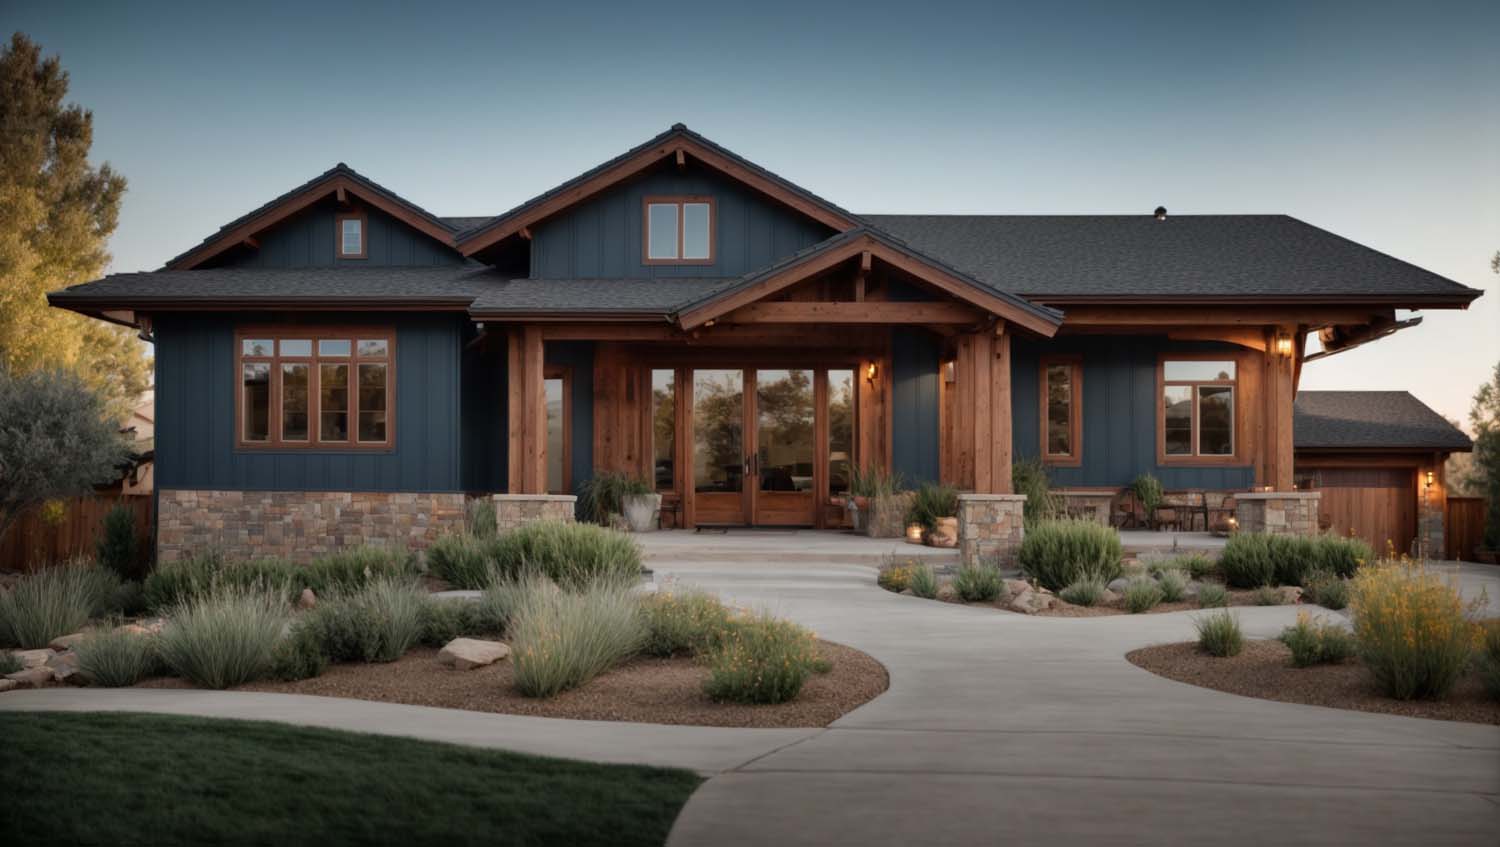 A classic Craftsman residence in Longmont, Colorado, with Wood Siding.